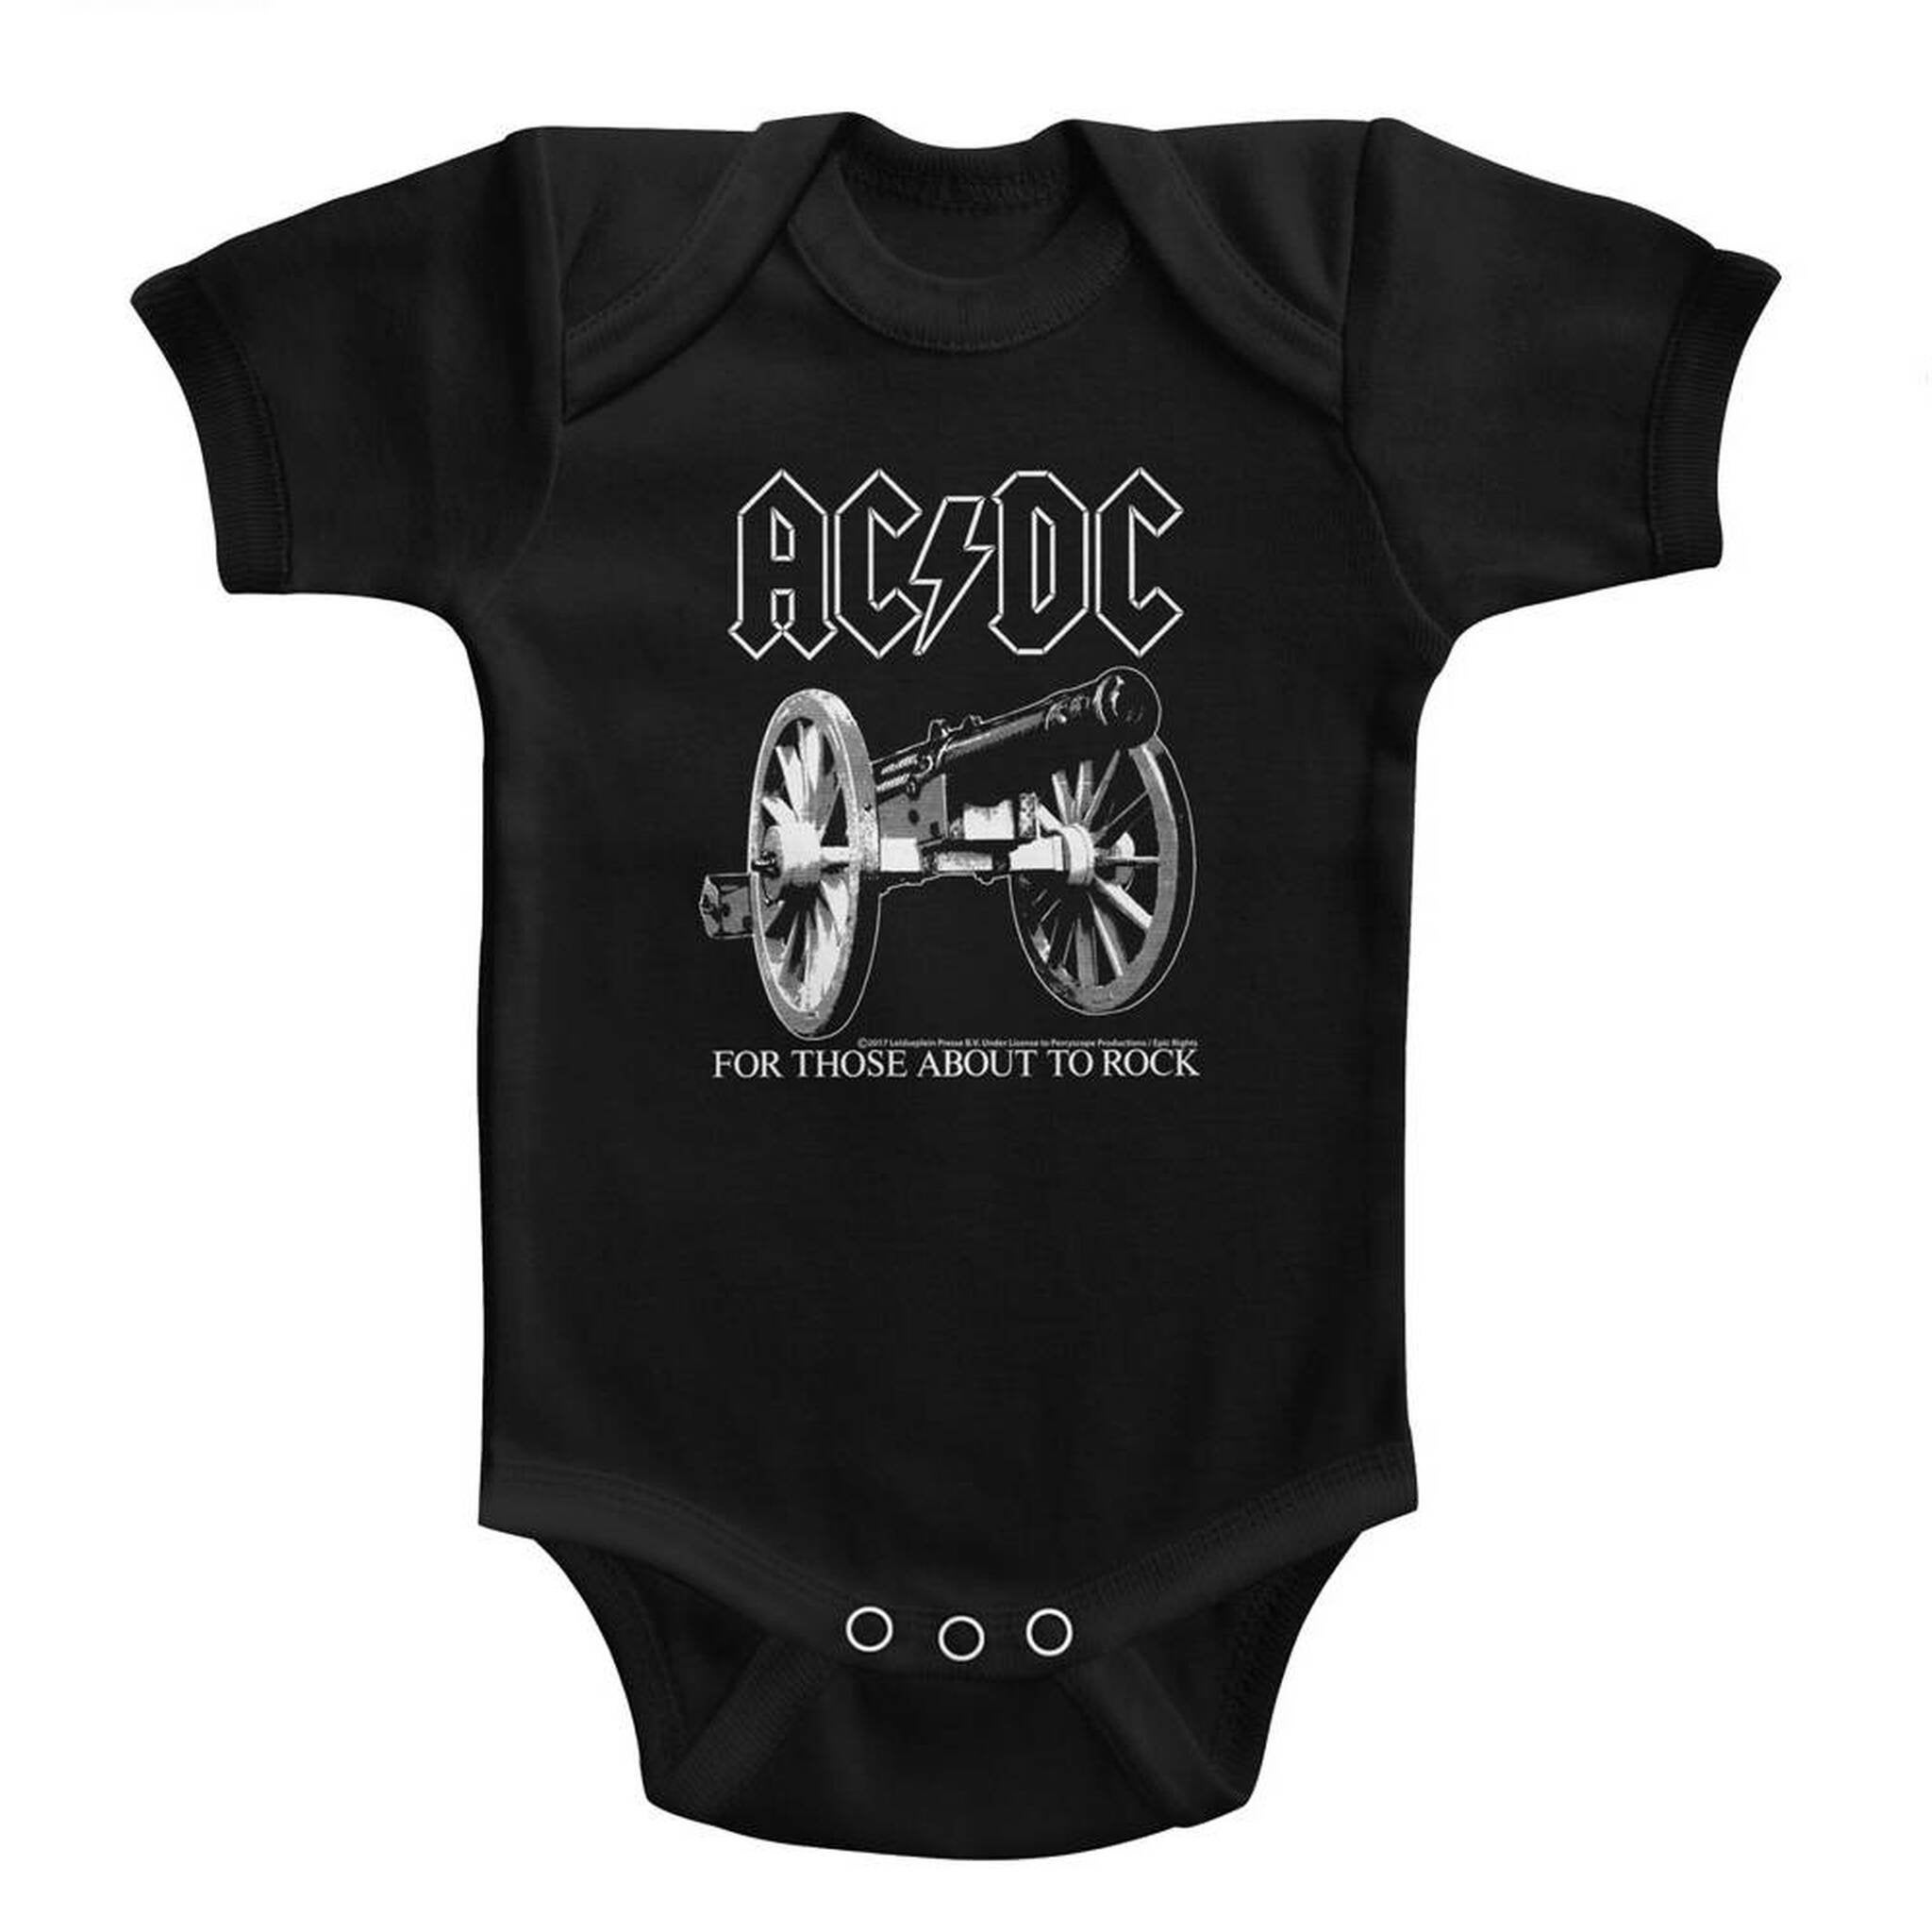 AC/DC About To Rock Black Infant Baby Onesie T-Shirt